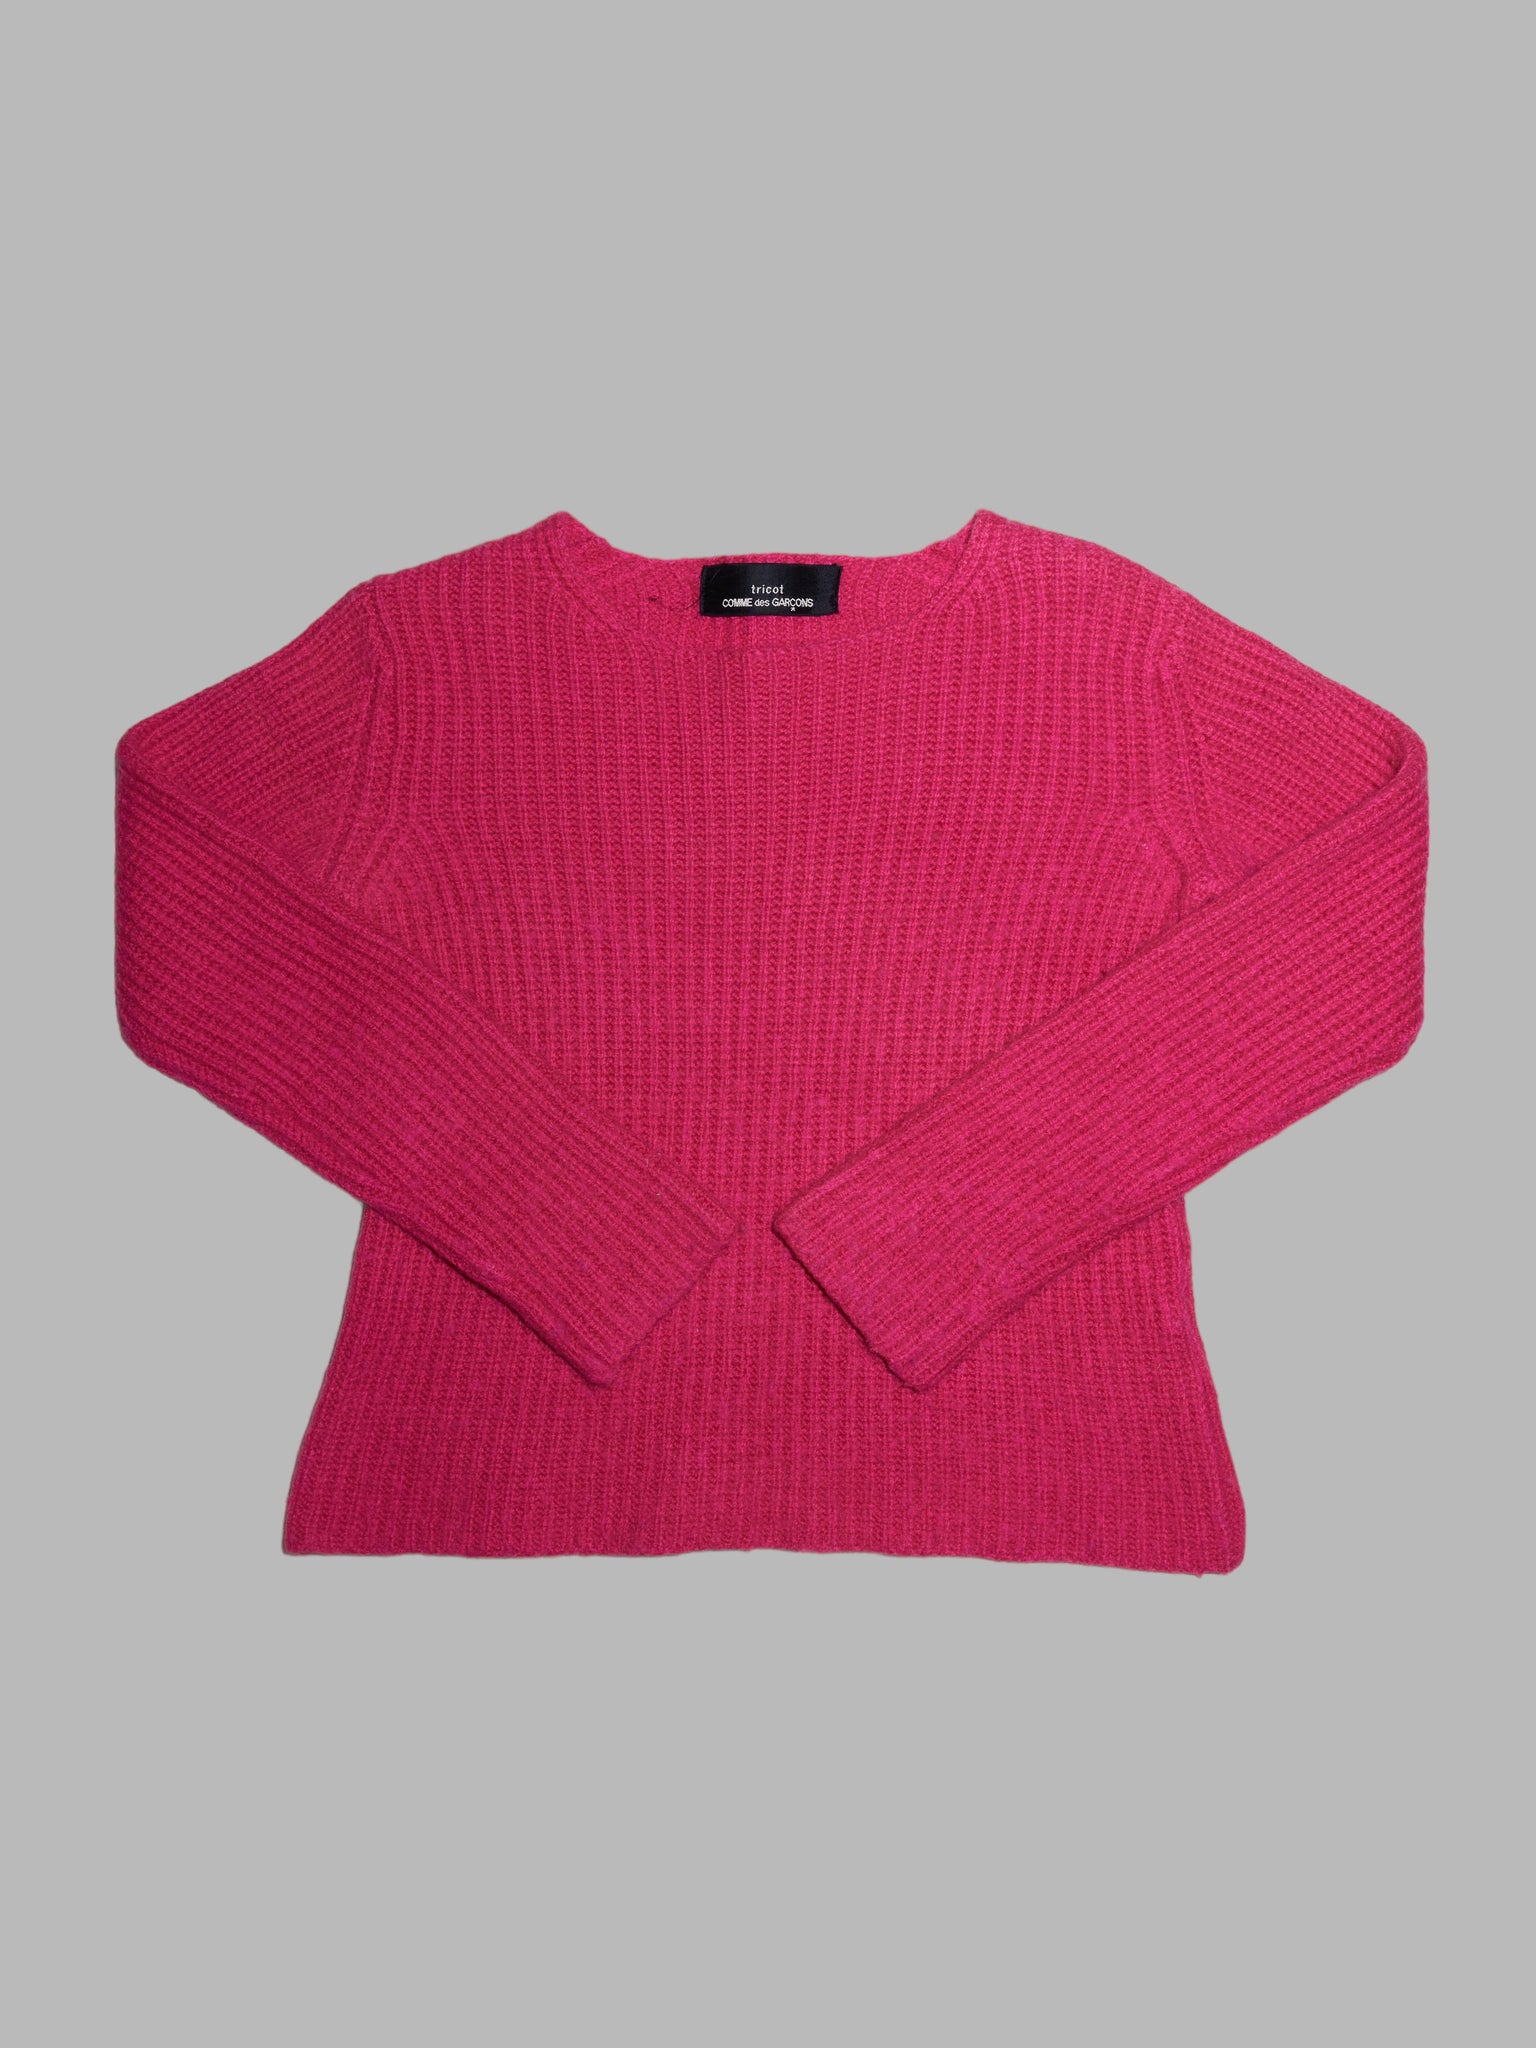 Tricot Comme des Garcons 1999 cropped pink wool cashmere knitted jumper